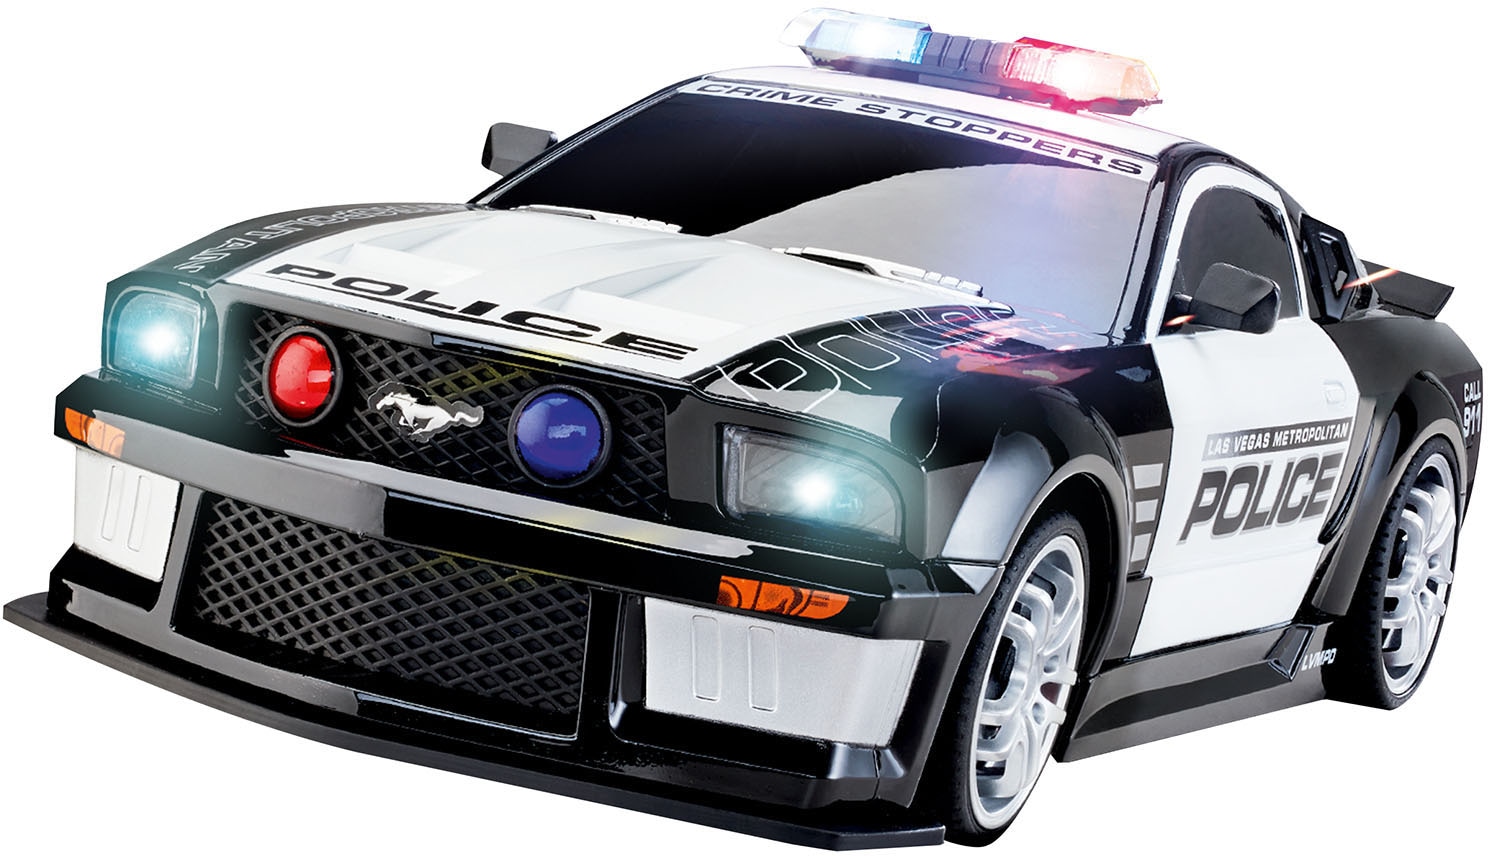 Revell® RC-Auto »Revell® control, Ford Mustang Police«